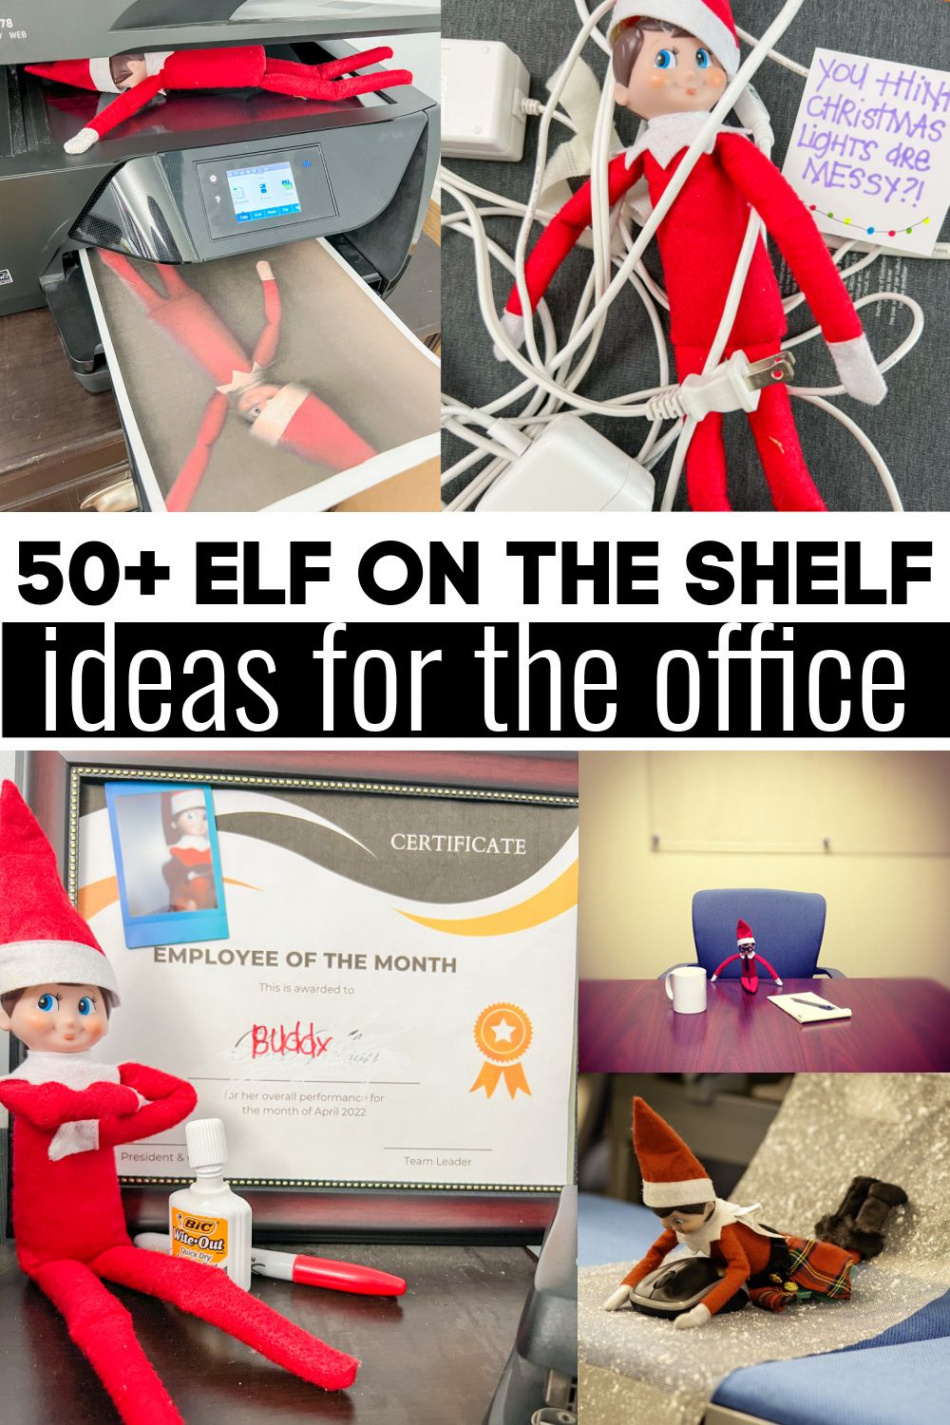 Elf on the Shelf Ideas for the Workplace  Awesome elf on the